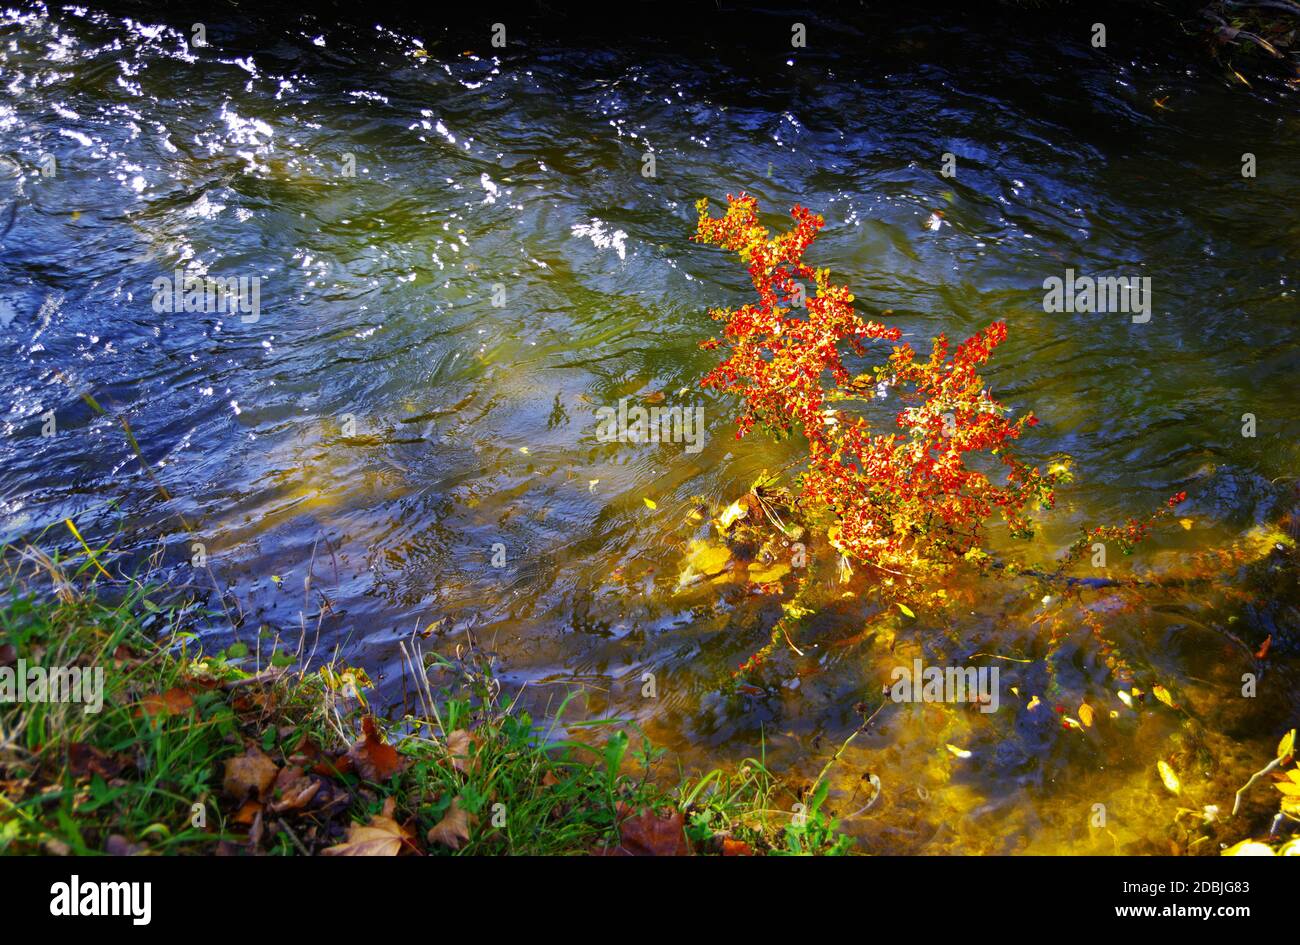 Branch with bright red autumn leaves hangs over a stream Stock Photo